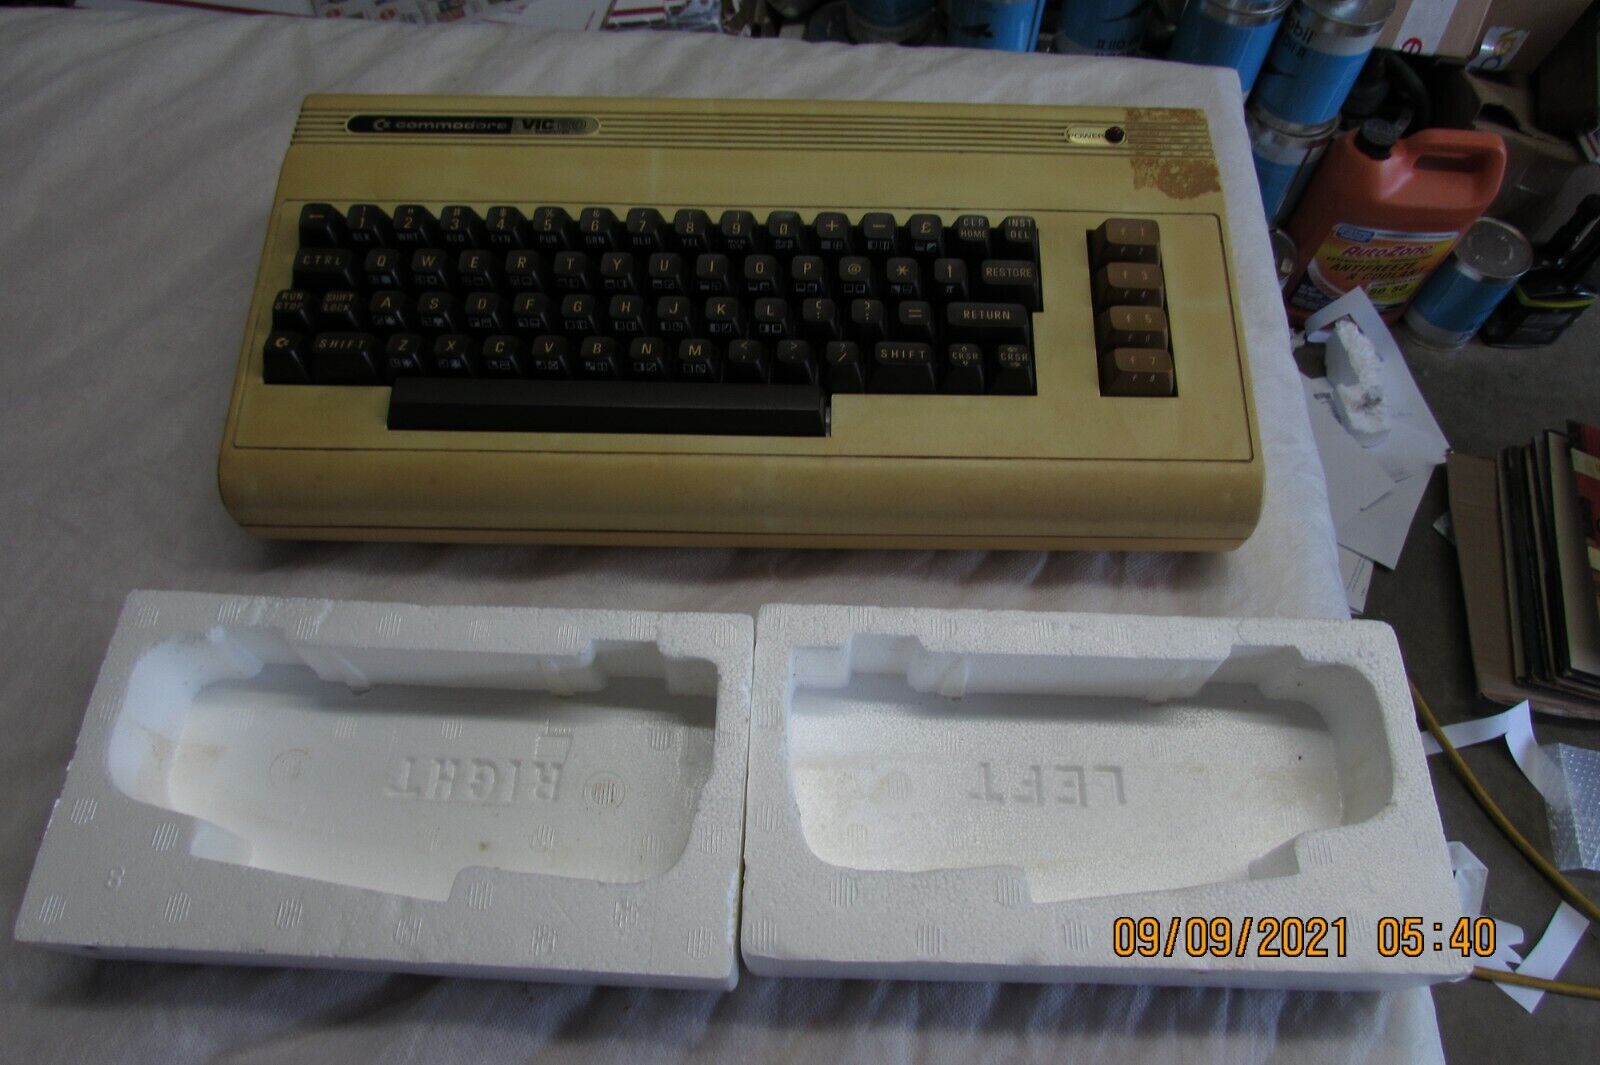 Vintage 1980s Commodore Personal Computer VIC 20 Untested Nice Cosmetic Shape